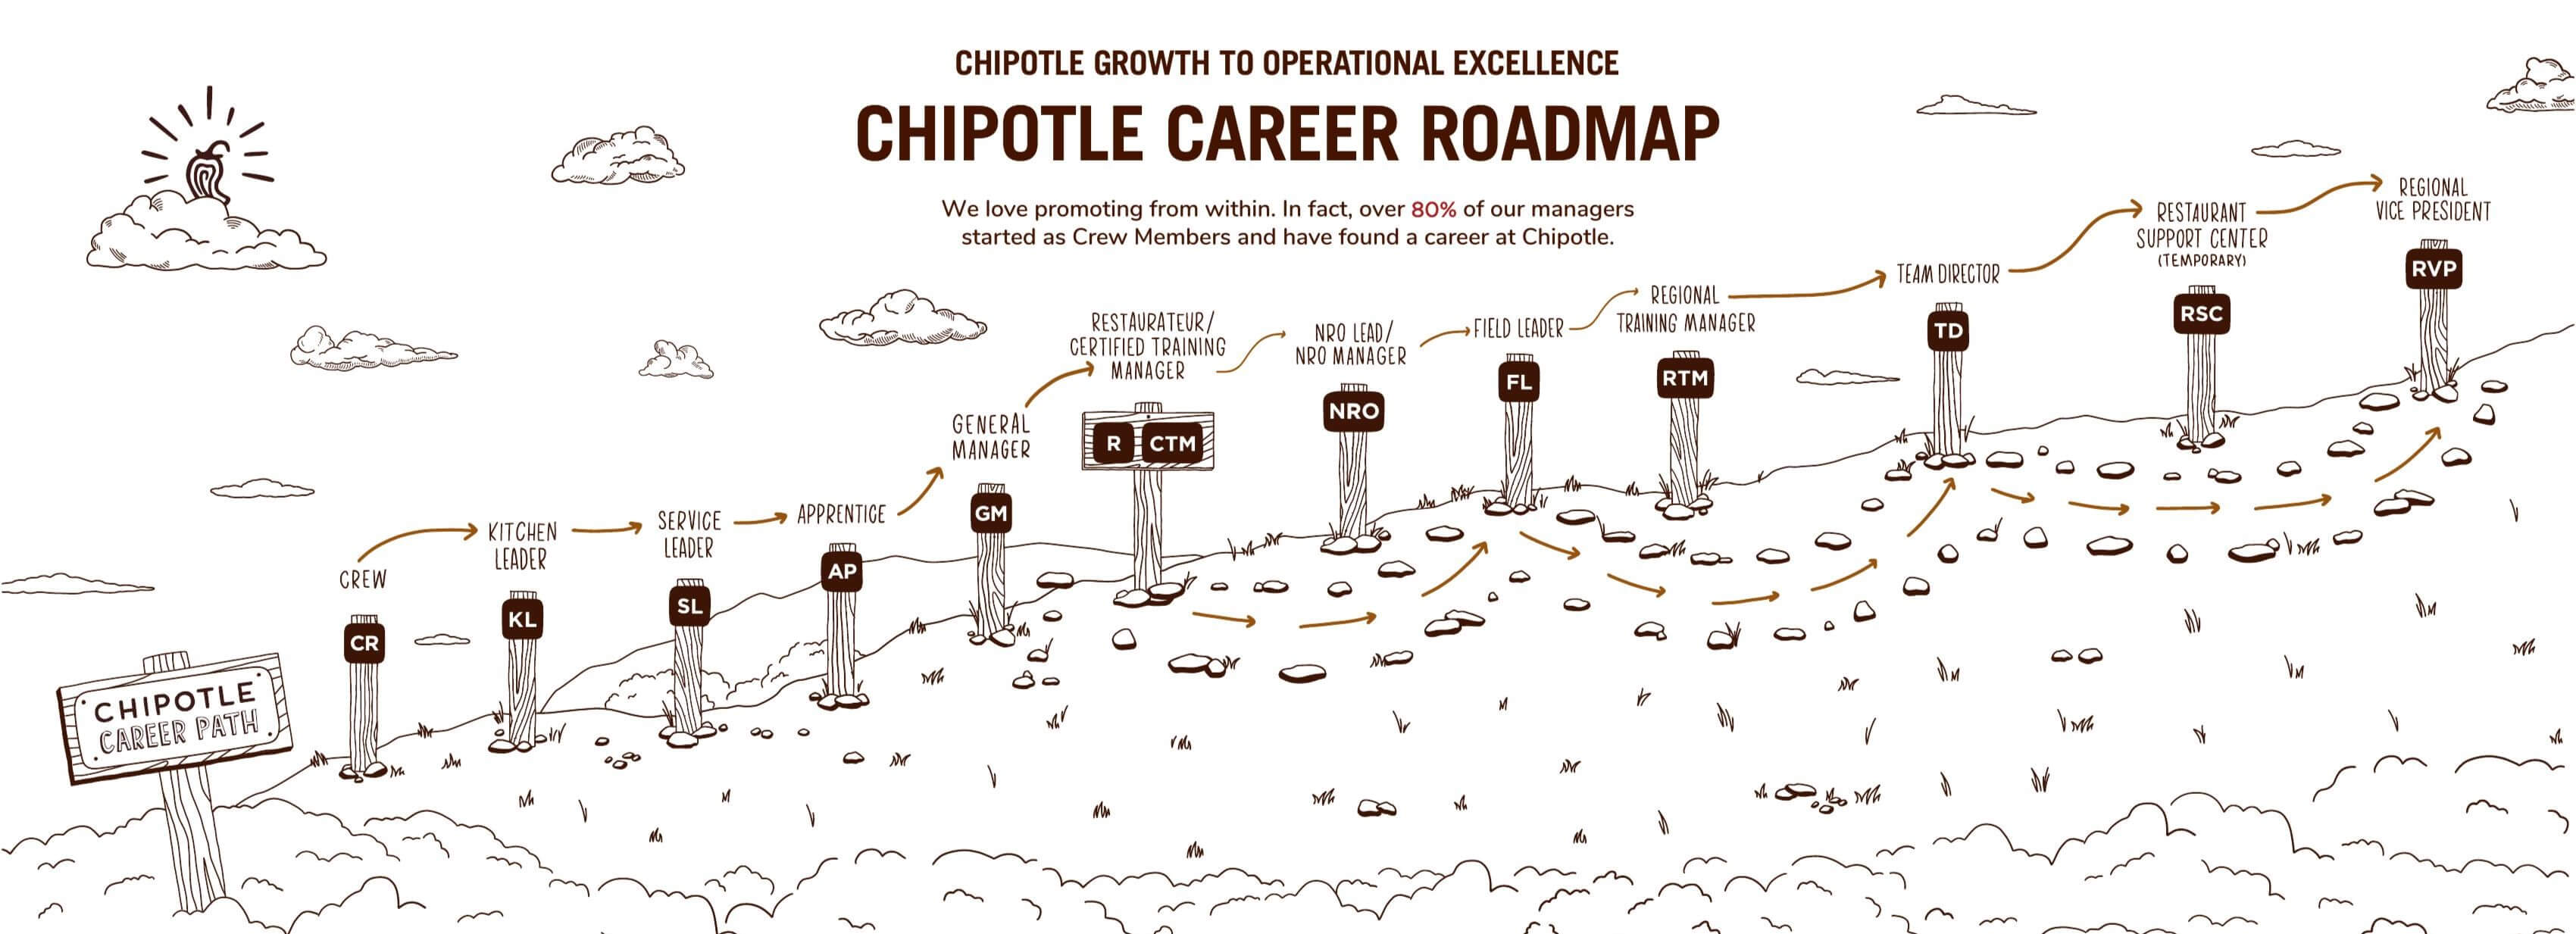 Chipotle Growth to Operational Excellence - Chipotle Career Roadmap. We love promoting from within. In fact, over 80% of our managers started as Crew Members and have found a career at Chipotle.